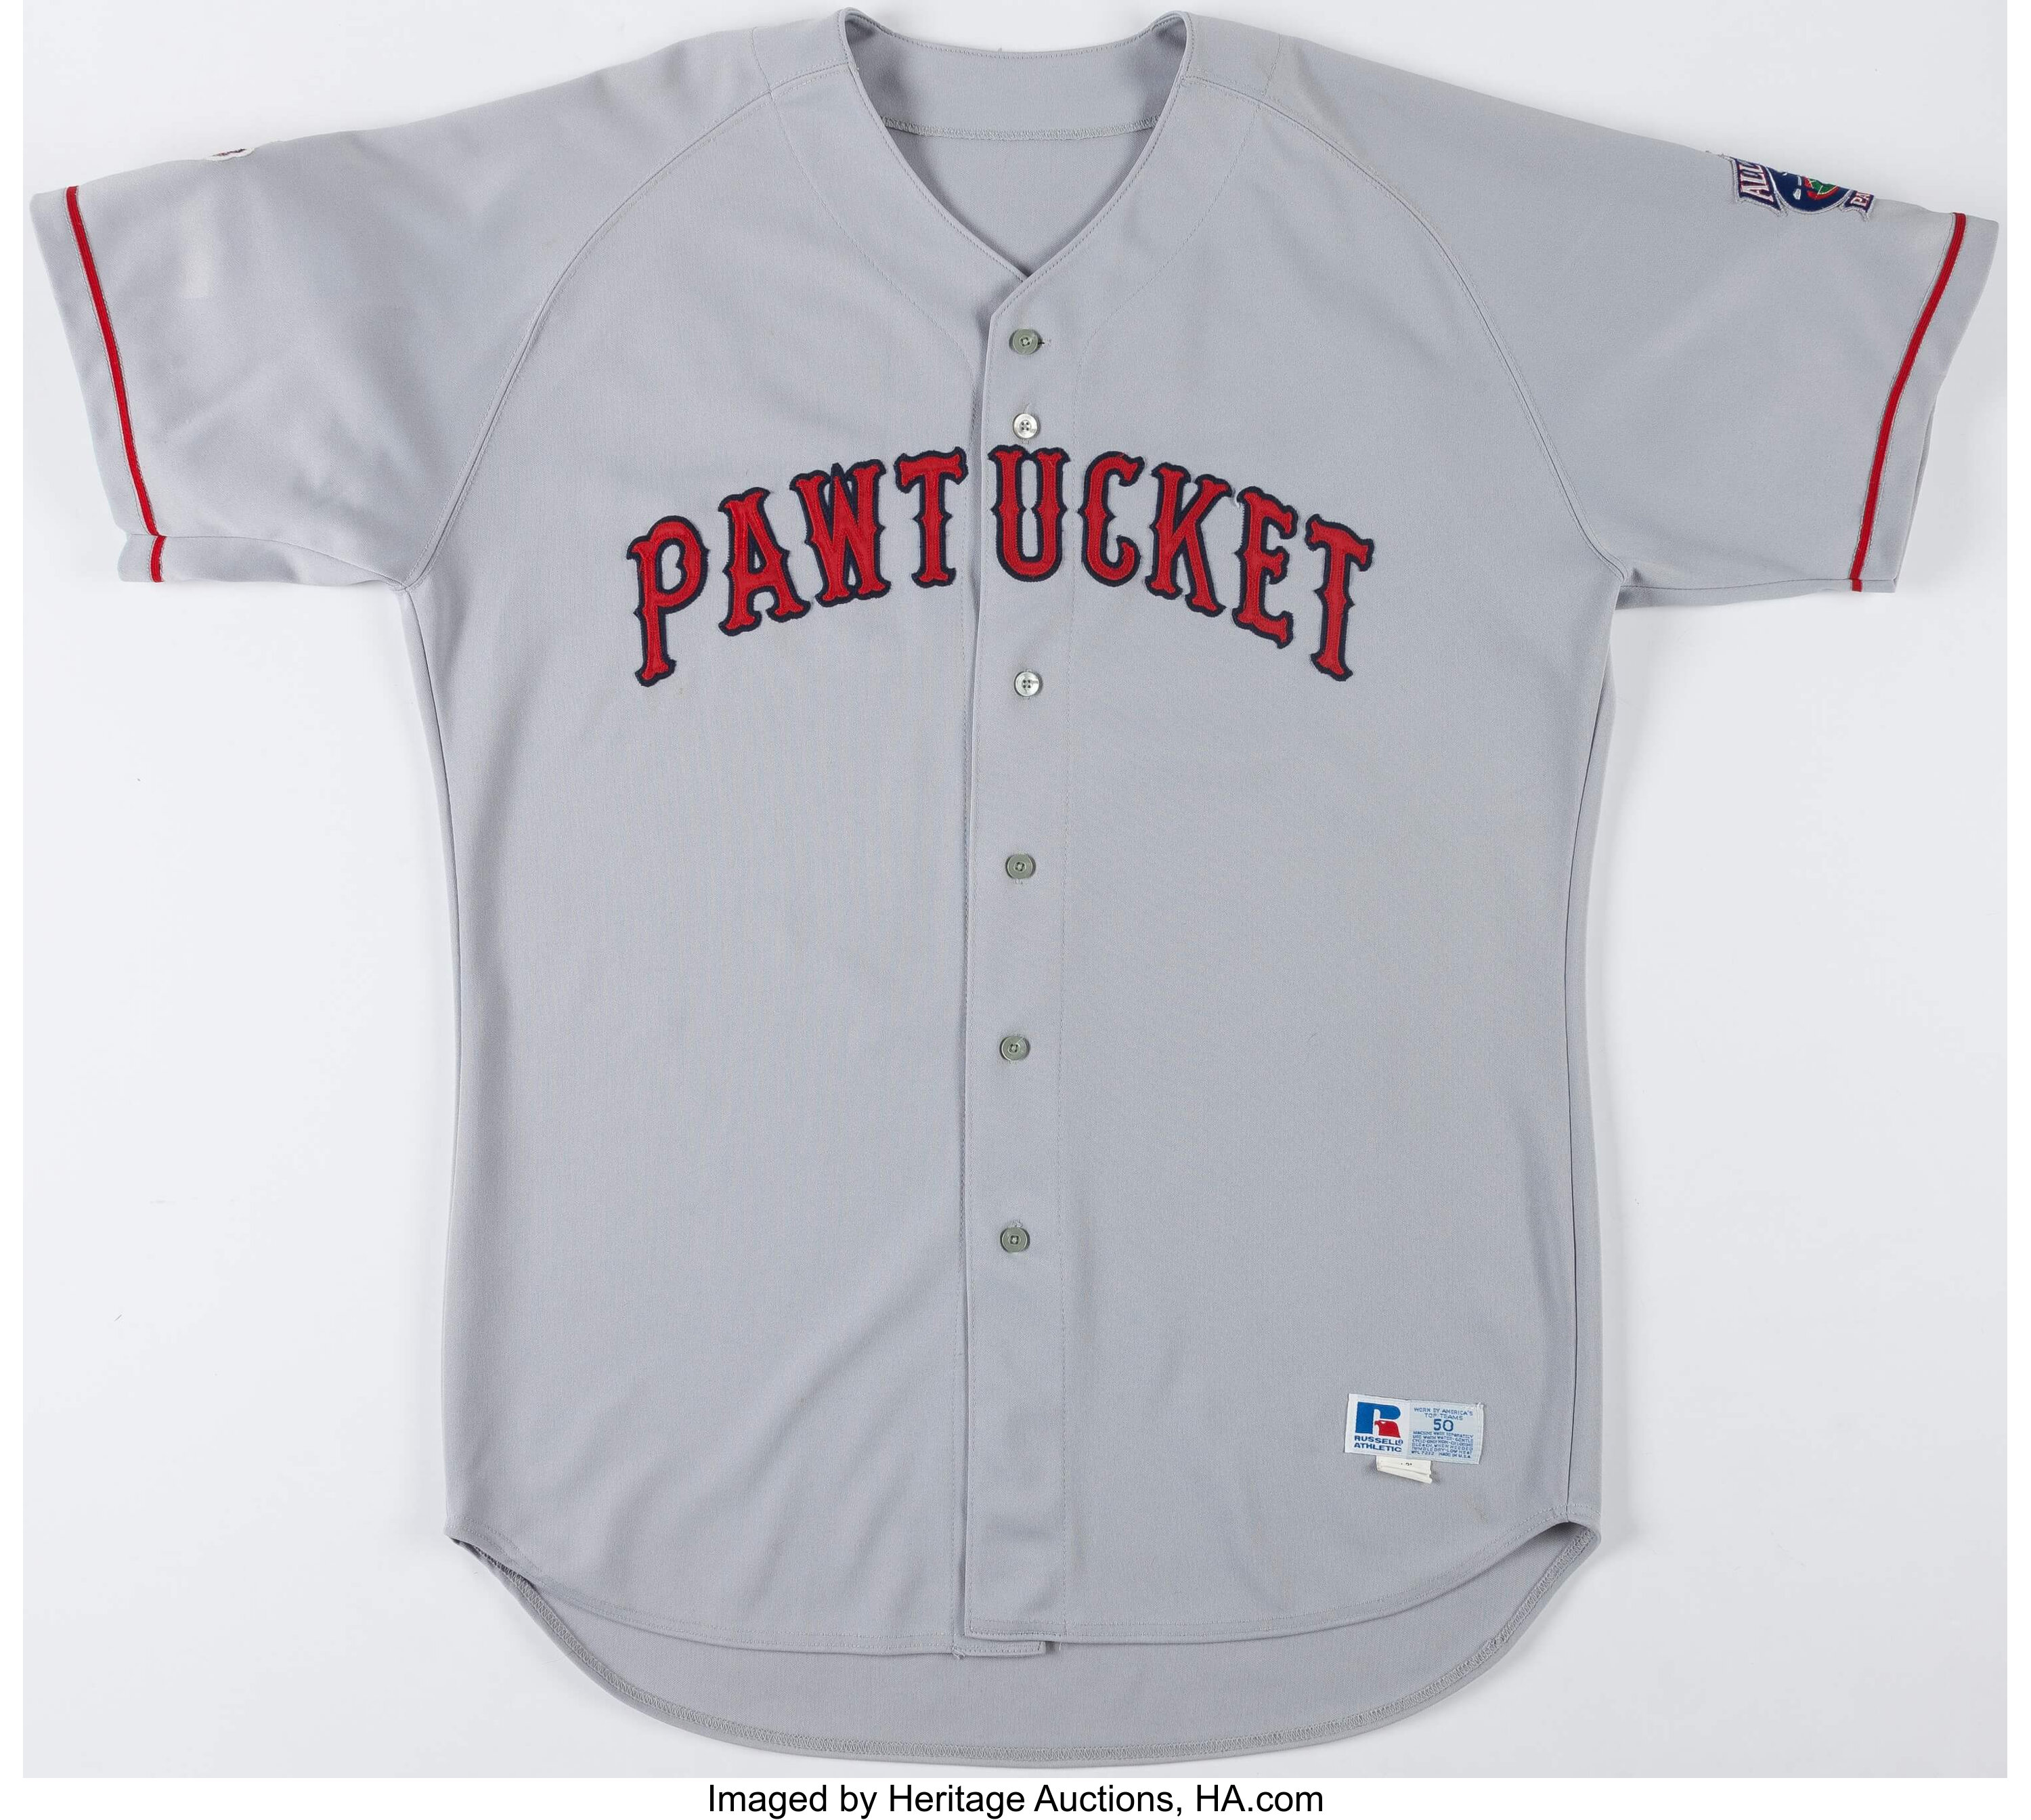 2004 Game Worn Pawtucket Red Sox Jersey.  Baseball Collectibles